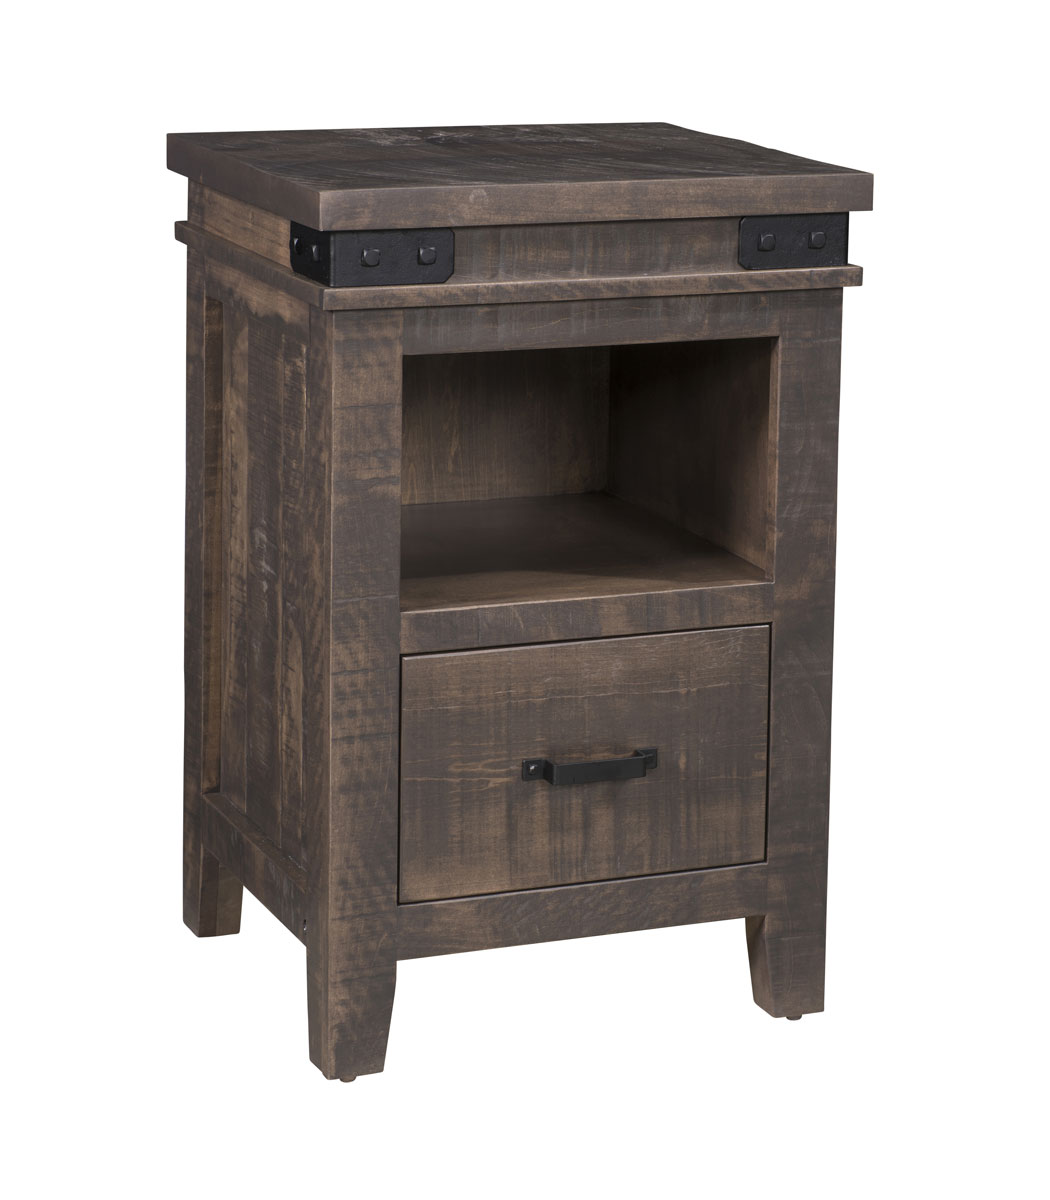 Coalbrooke 1-Drawer Nightstand shown in brown maple with a weathered char finish.